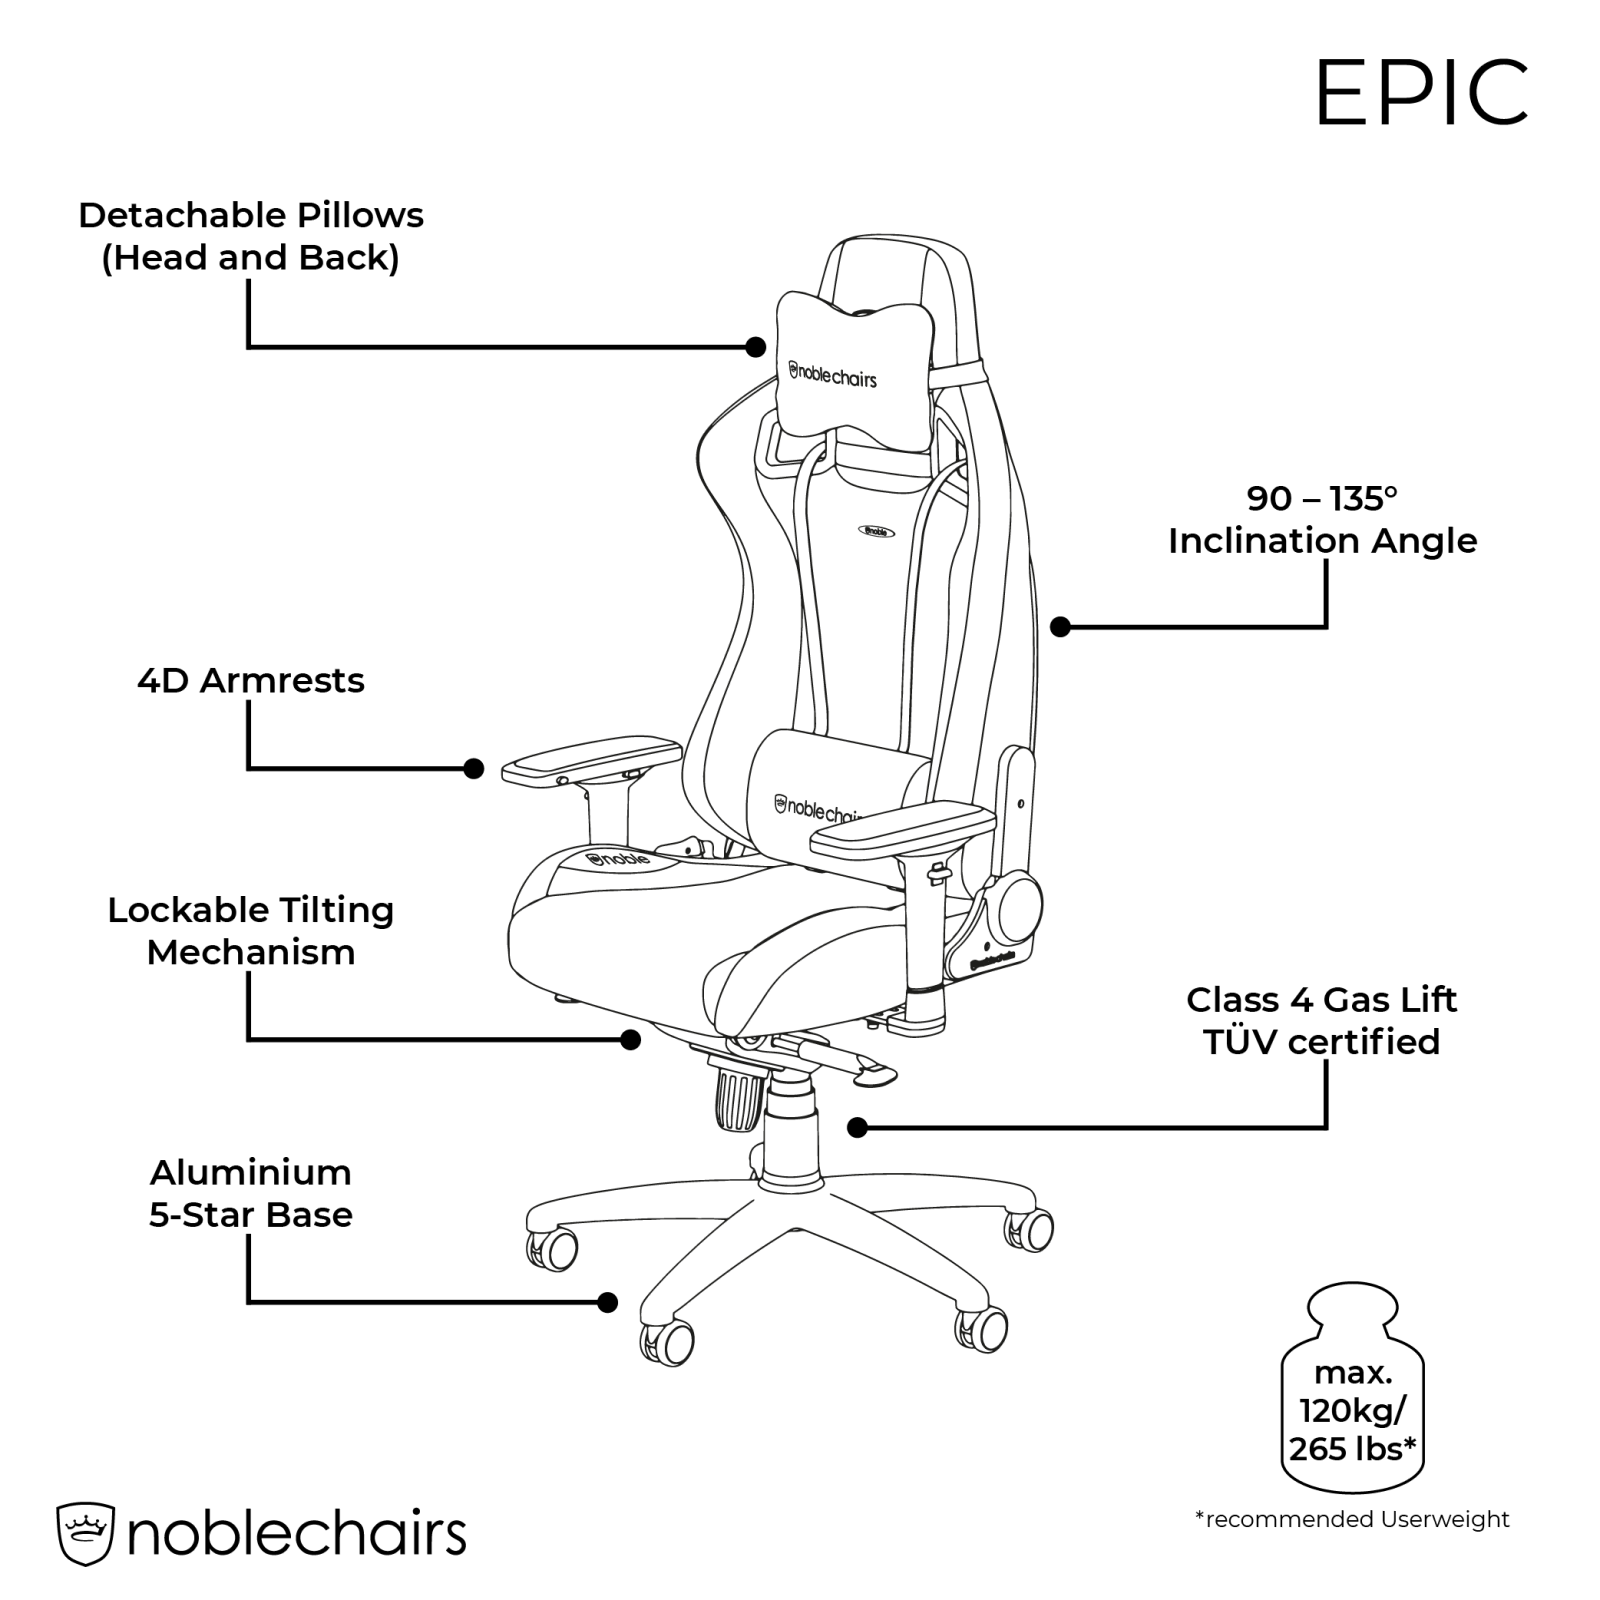 noblechairs EPIC Features